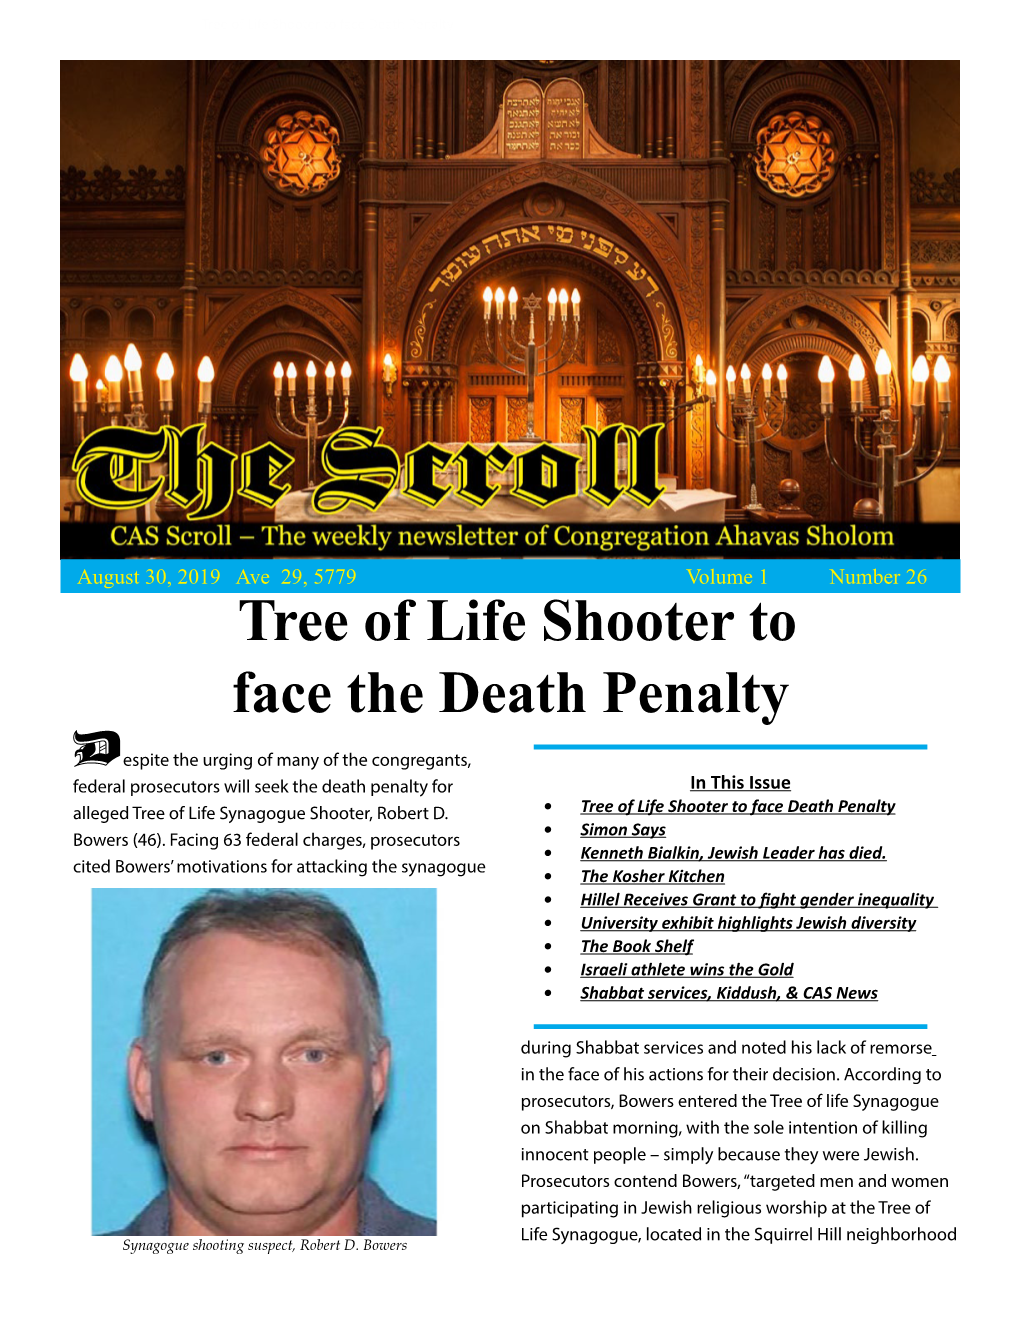 Tree of Life Shooter to Face the Death Penalty